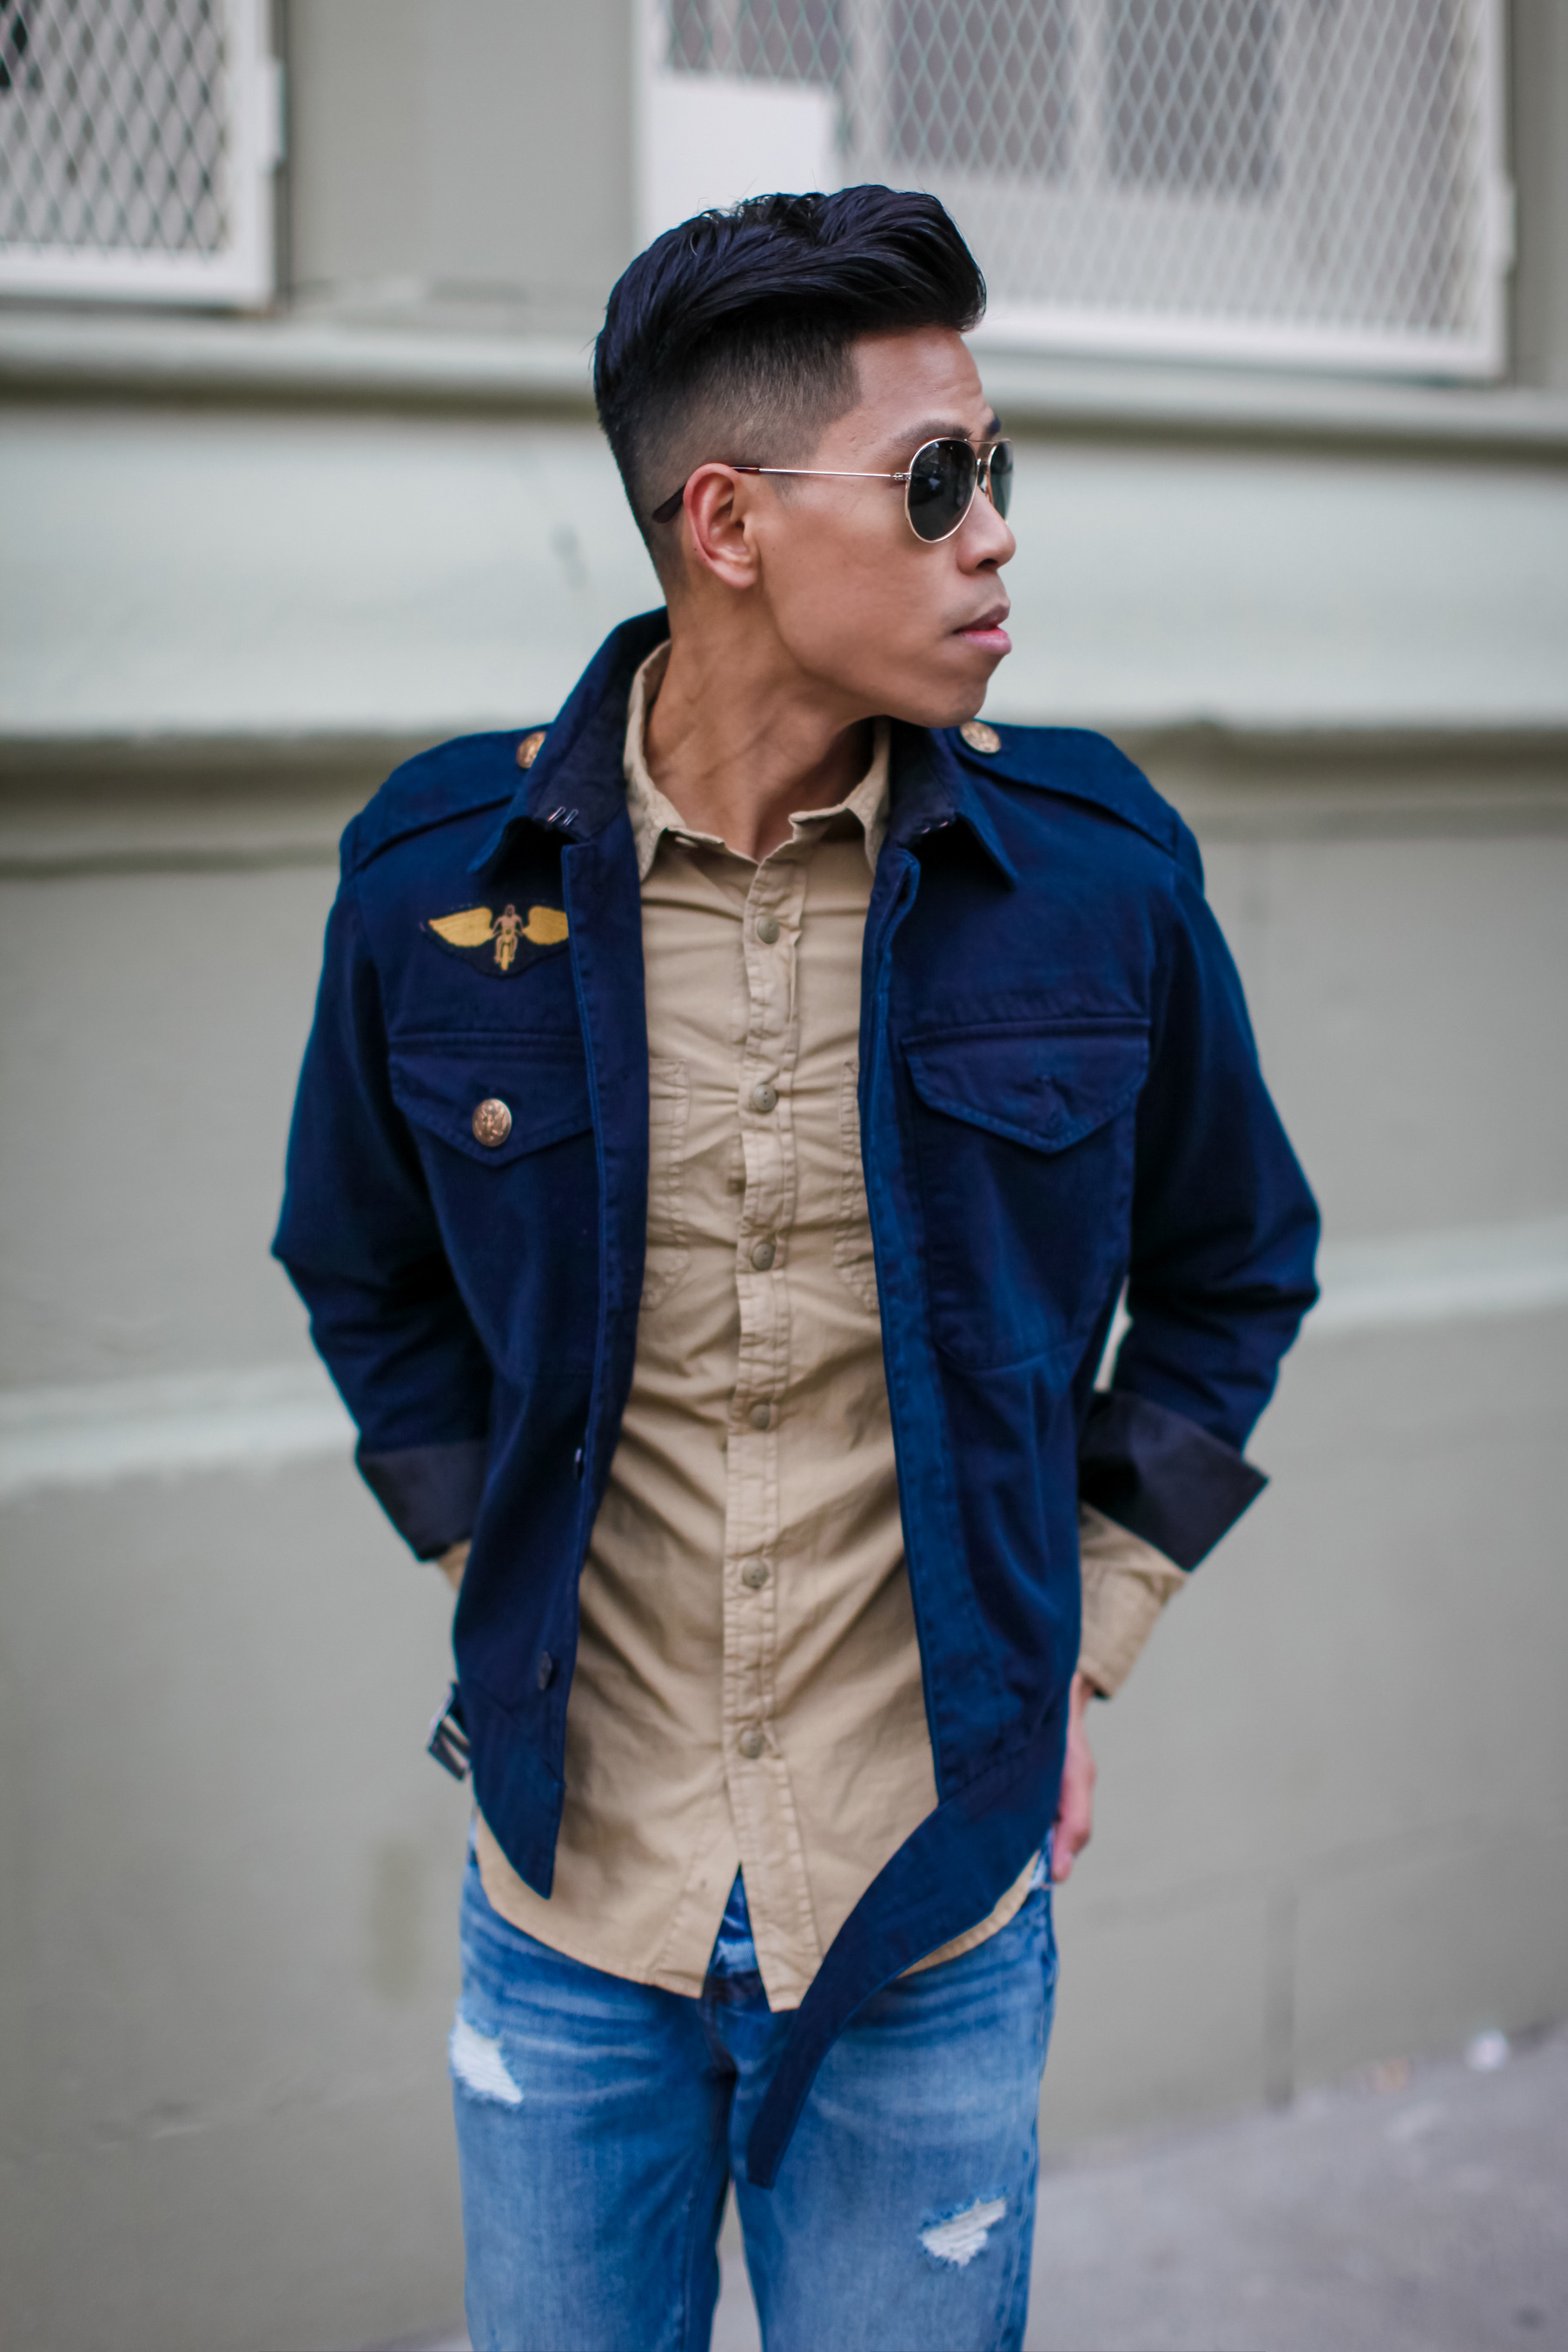 oh anthonio - Anthony Urbano - men's aviator pilot inspired outfit